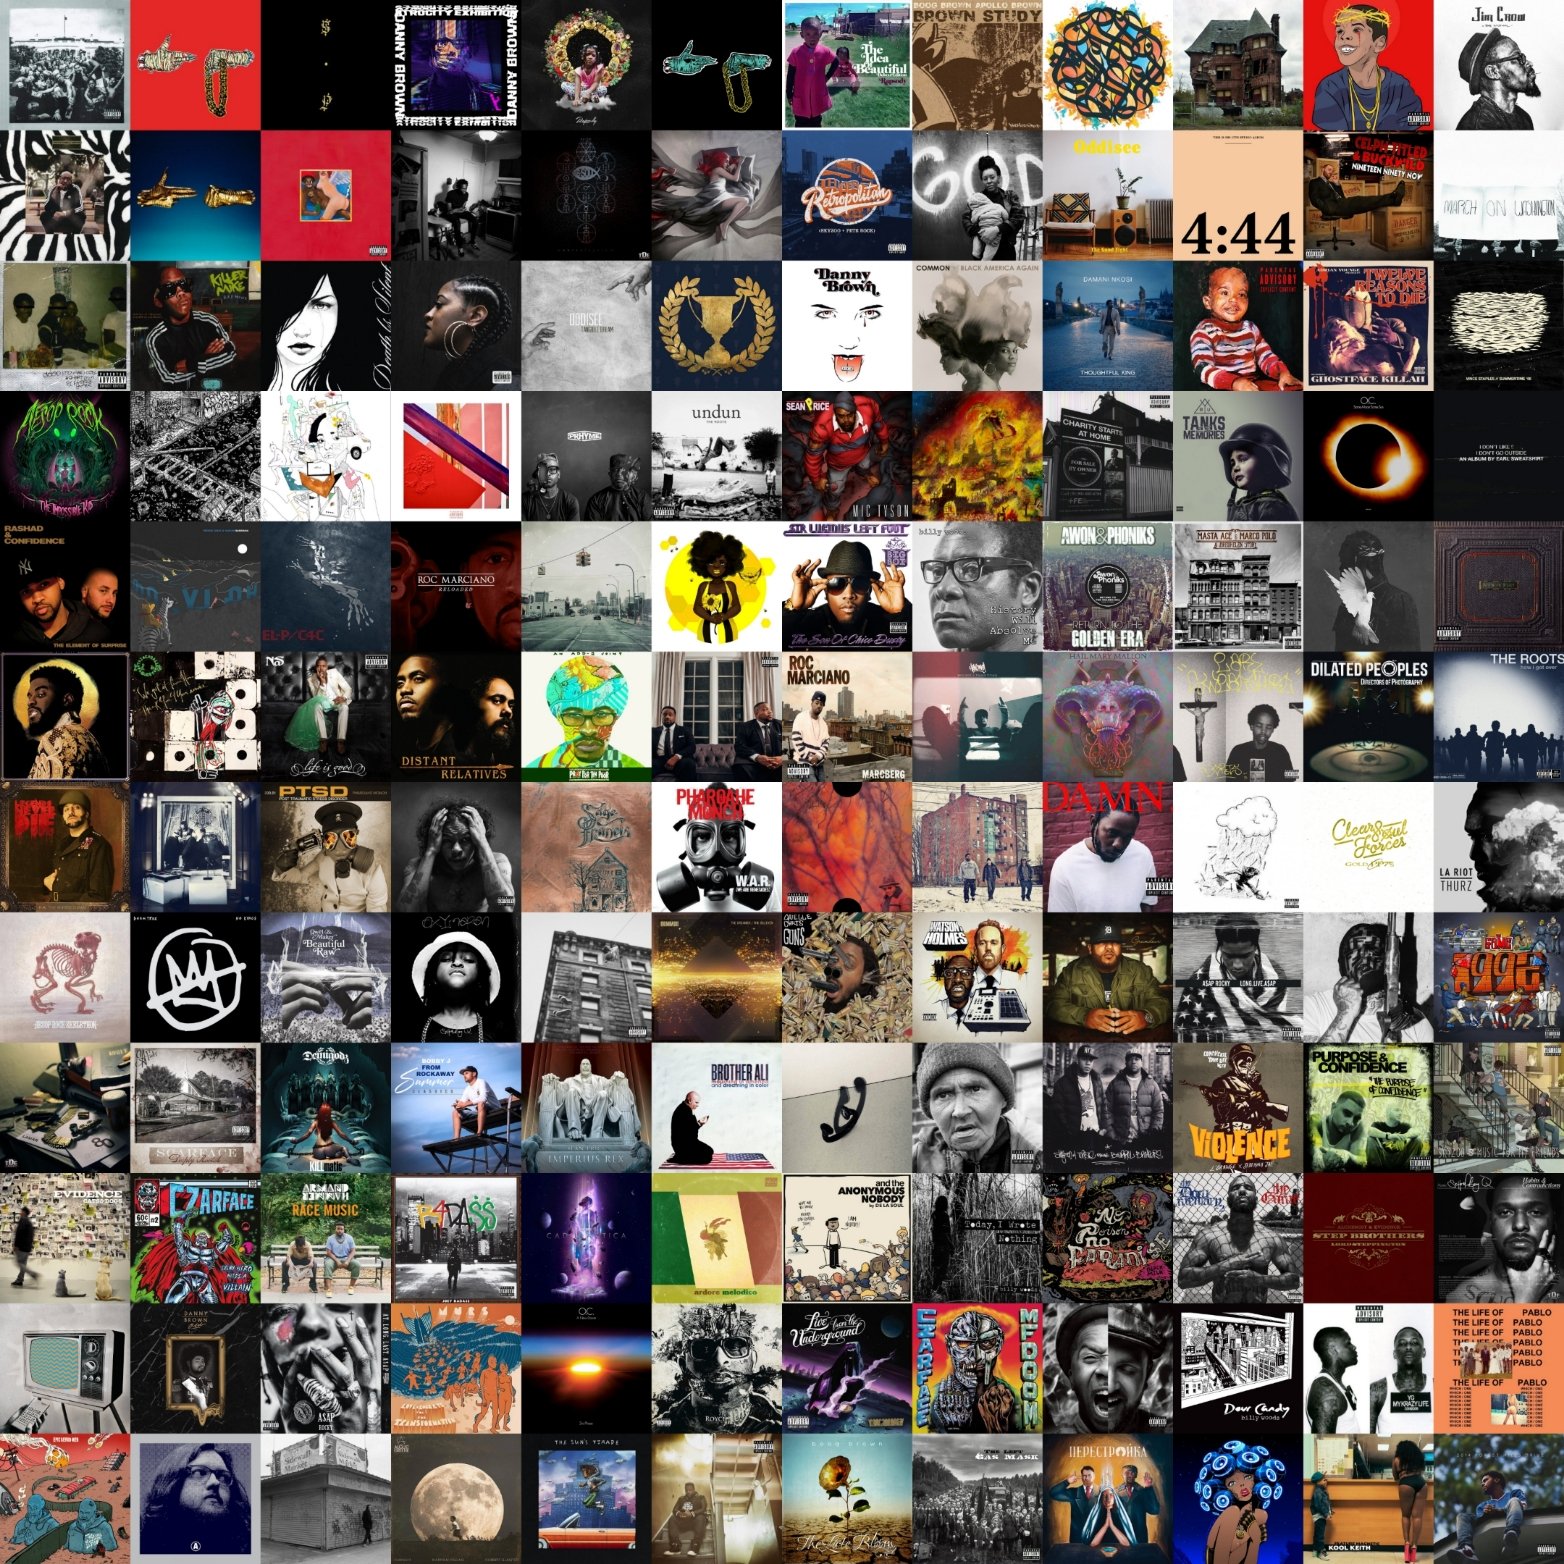 Forgænger Distribuere kontakt Hip Hop Golden Age on Twitter: "OK - so here it is! HHGA's list with our  favorite albums of the 2010s. What's YOUR top 10 of the decade? Top 150 Hip  Hop